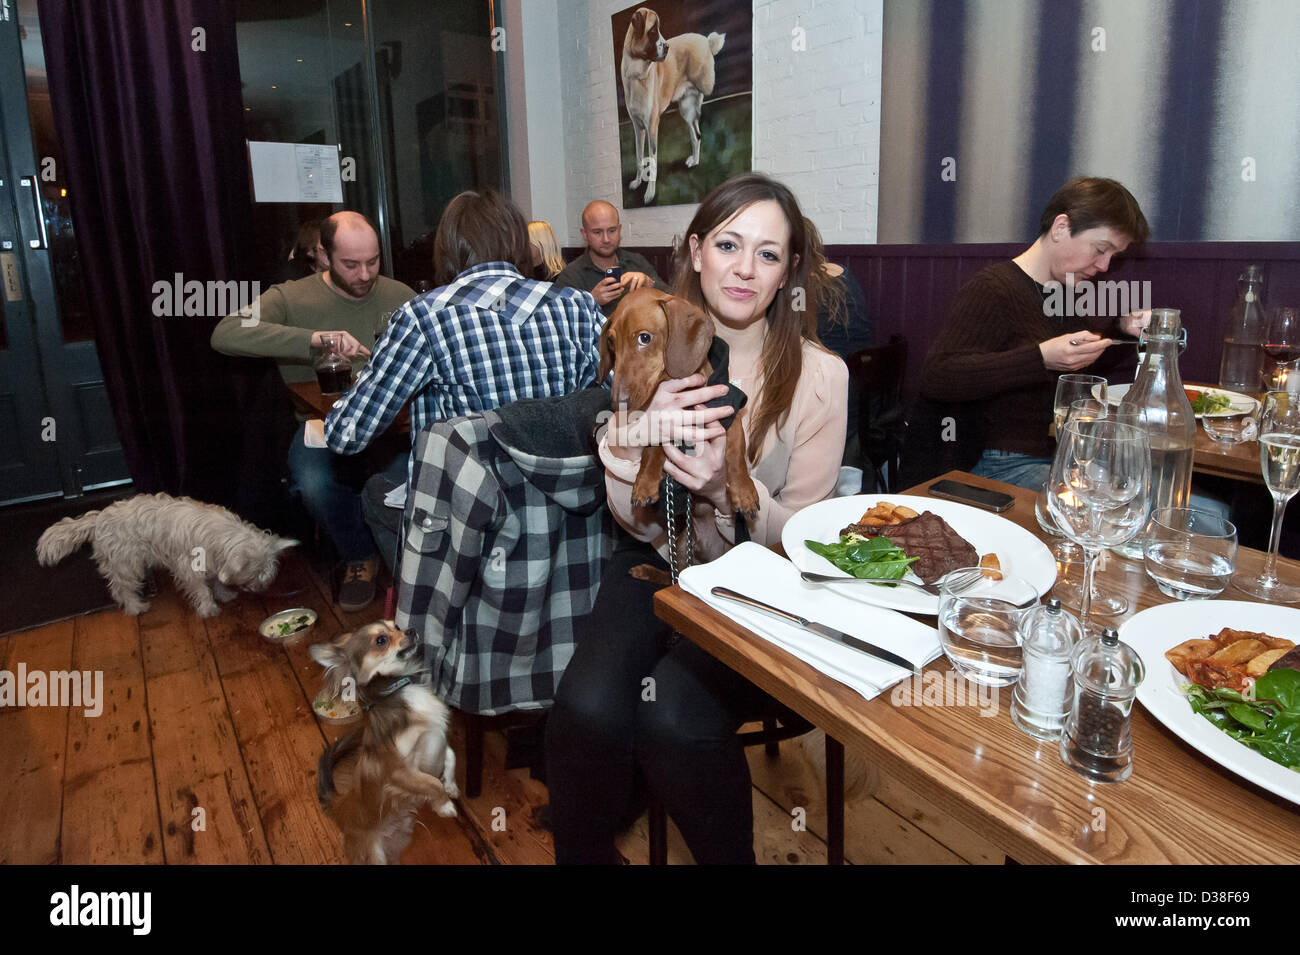 Morgan the Daschund with owner Jules and fellow diners enjoy My Doggy Valentine Dinner for dogs and friends, a fundraiser for the Dogs Trust at the Coal Shed Restaurant, Brighton, East Sussex, UK. 12th February 2013. Photo by Julia Claxton/Alamy live news. Stock Photo